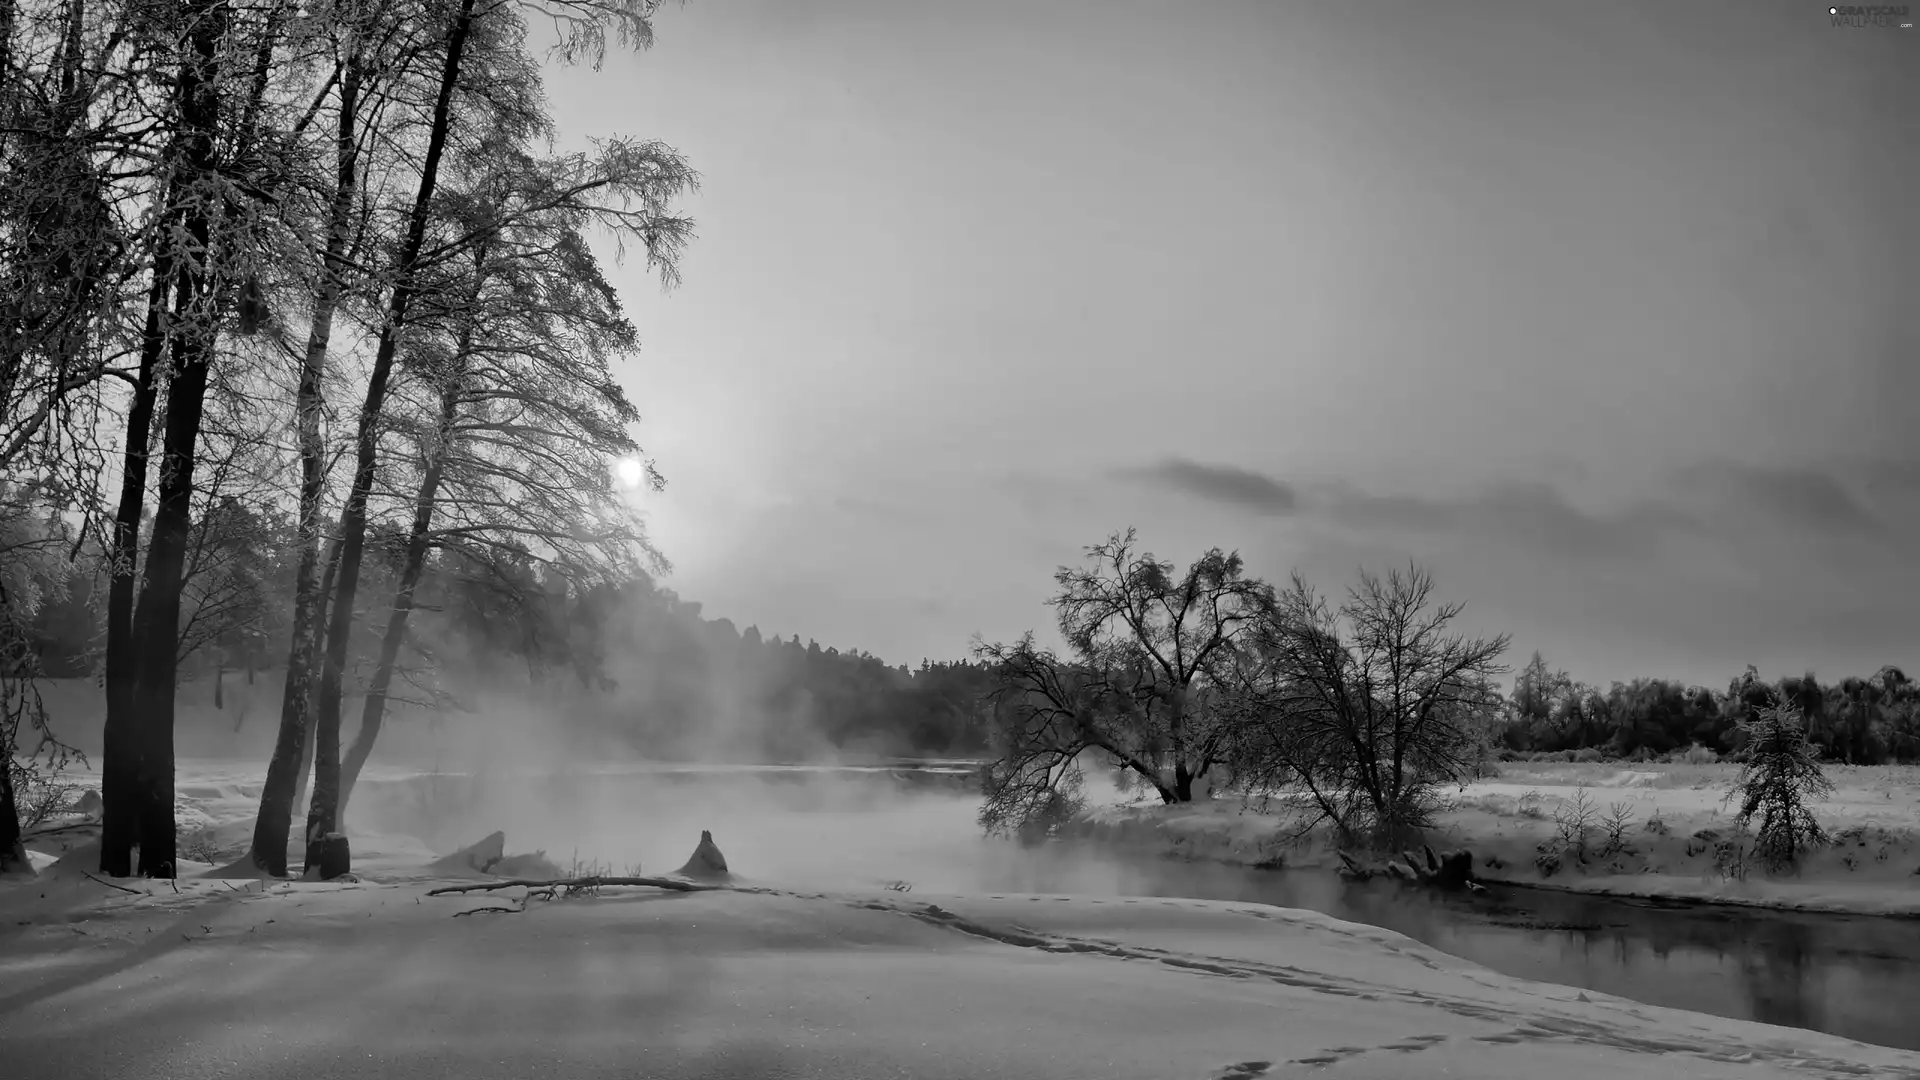 River, dawn, viewes, forest, winter, trees, Fog